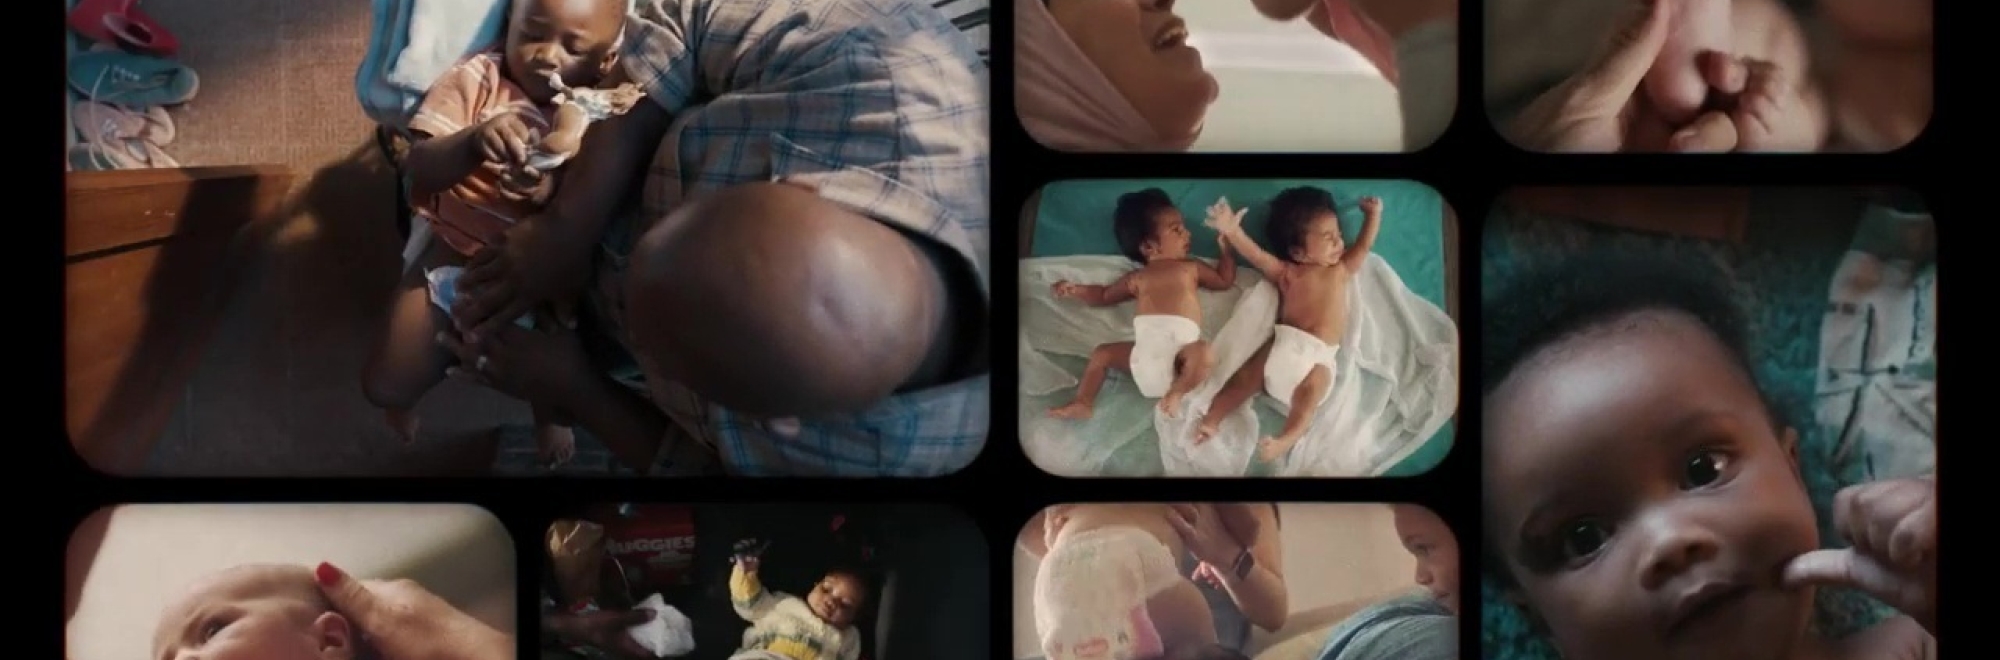 Huggies baby care brand takes its first steps into Super Bowl advertising